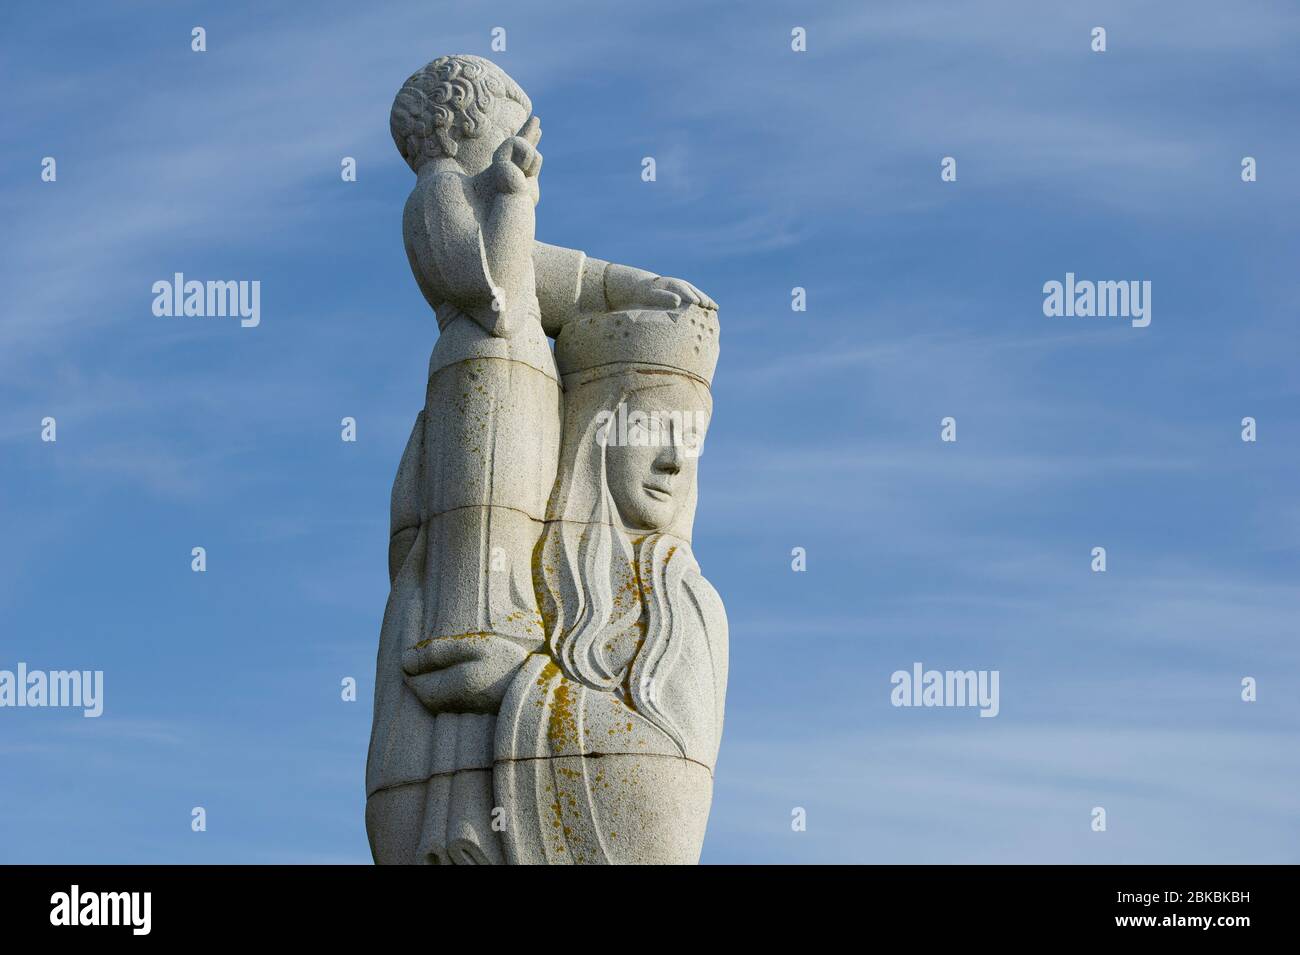 Our Lady of the Isles by Hew Lorimer. The sculpture of the Madonna and Child is on the slopes of Ruabhal, South Uist in the Outer Hebrides, Scotland. Stock Photo